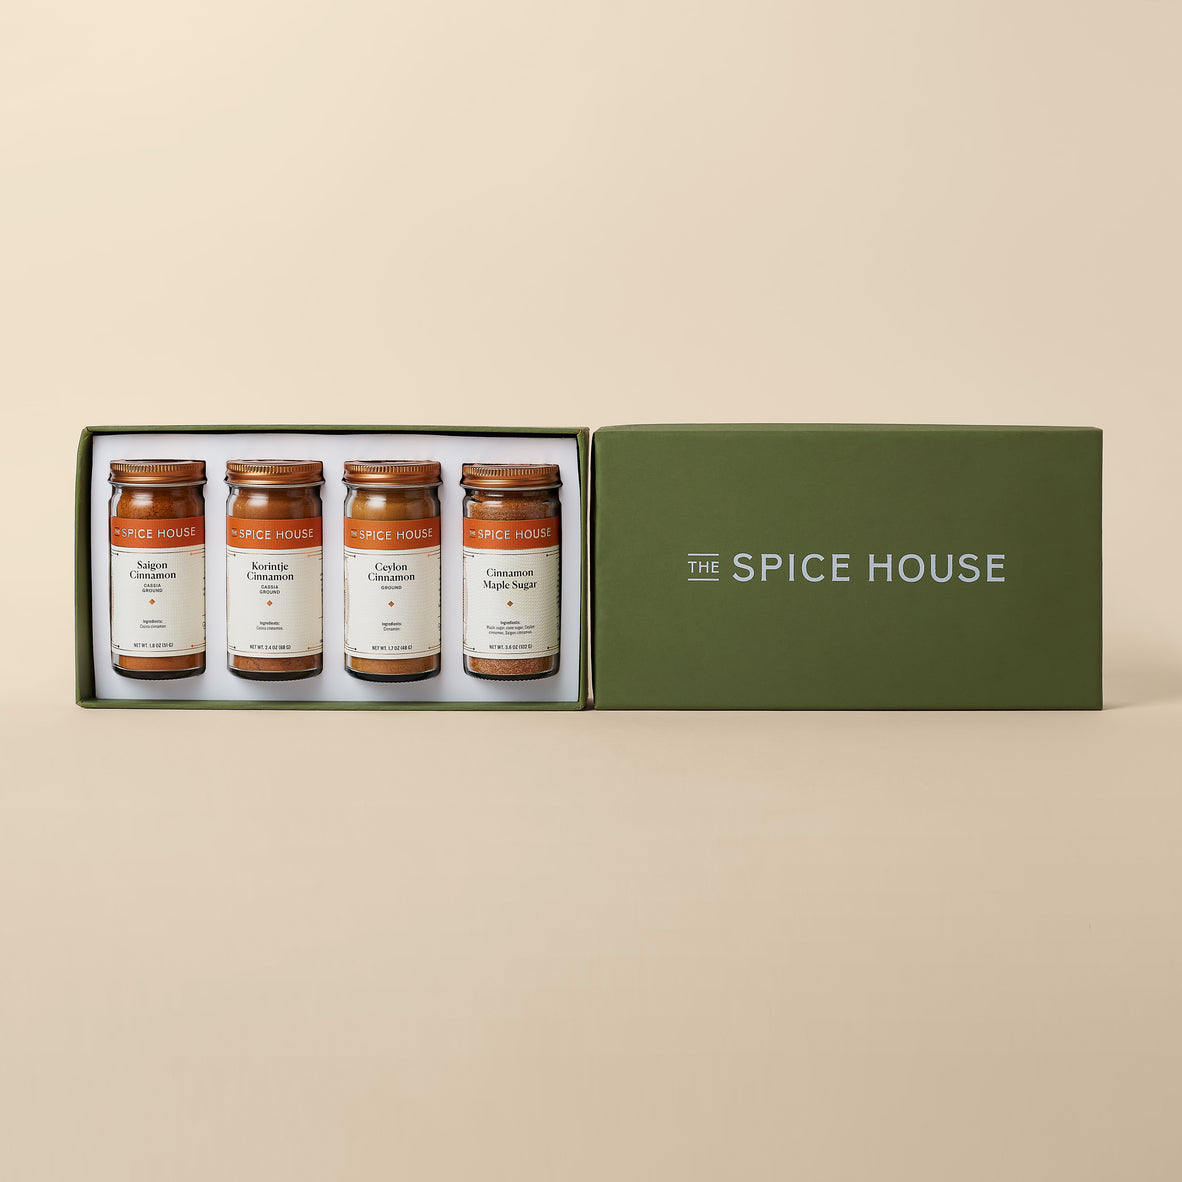 Organic Spice Gift Sets - Gourmet Spice Collections - Cooking